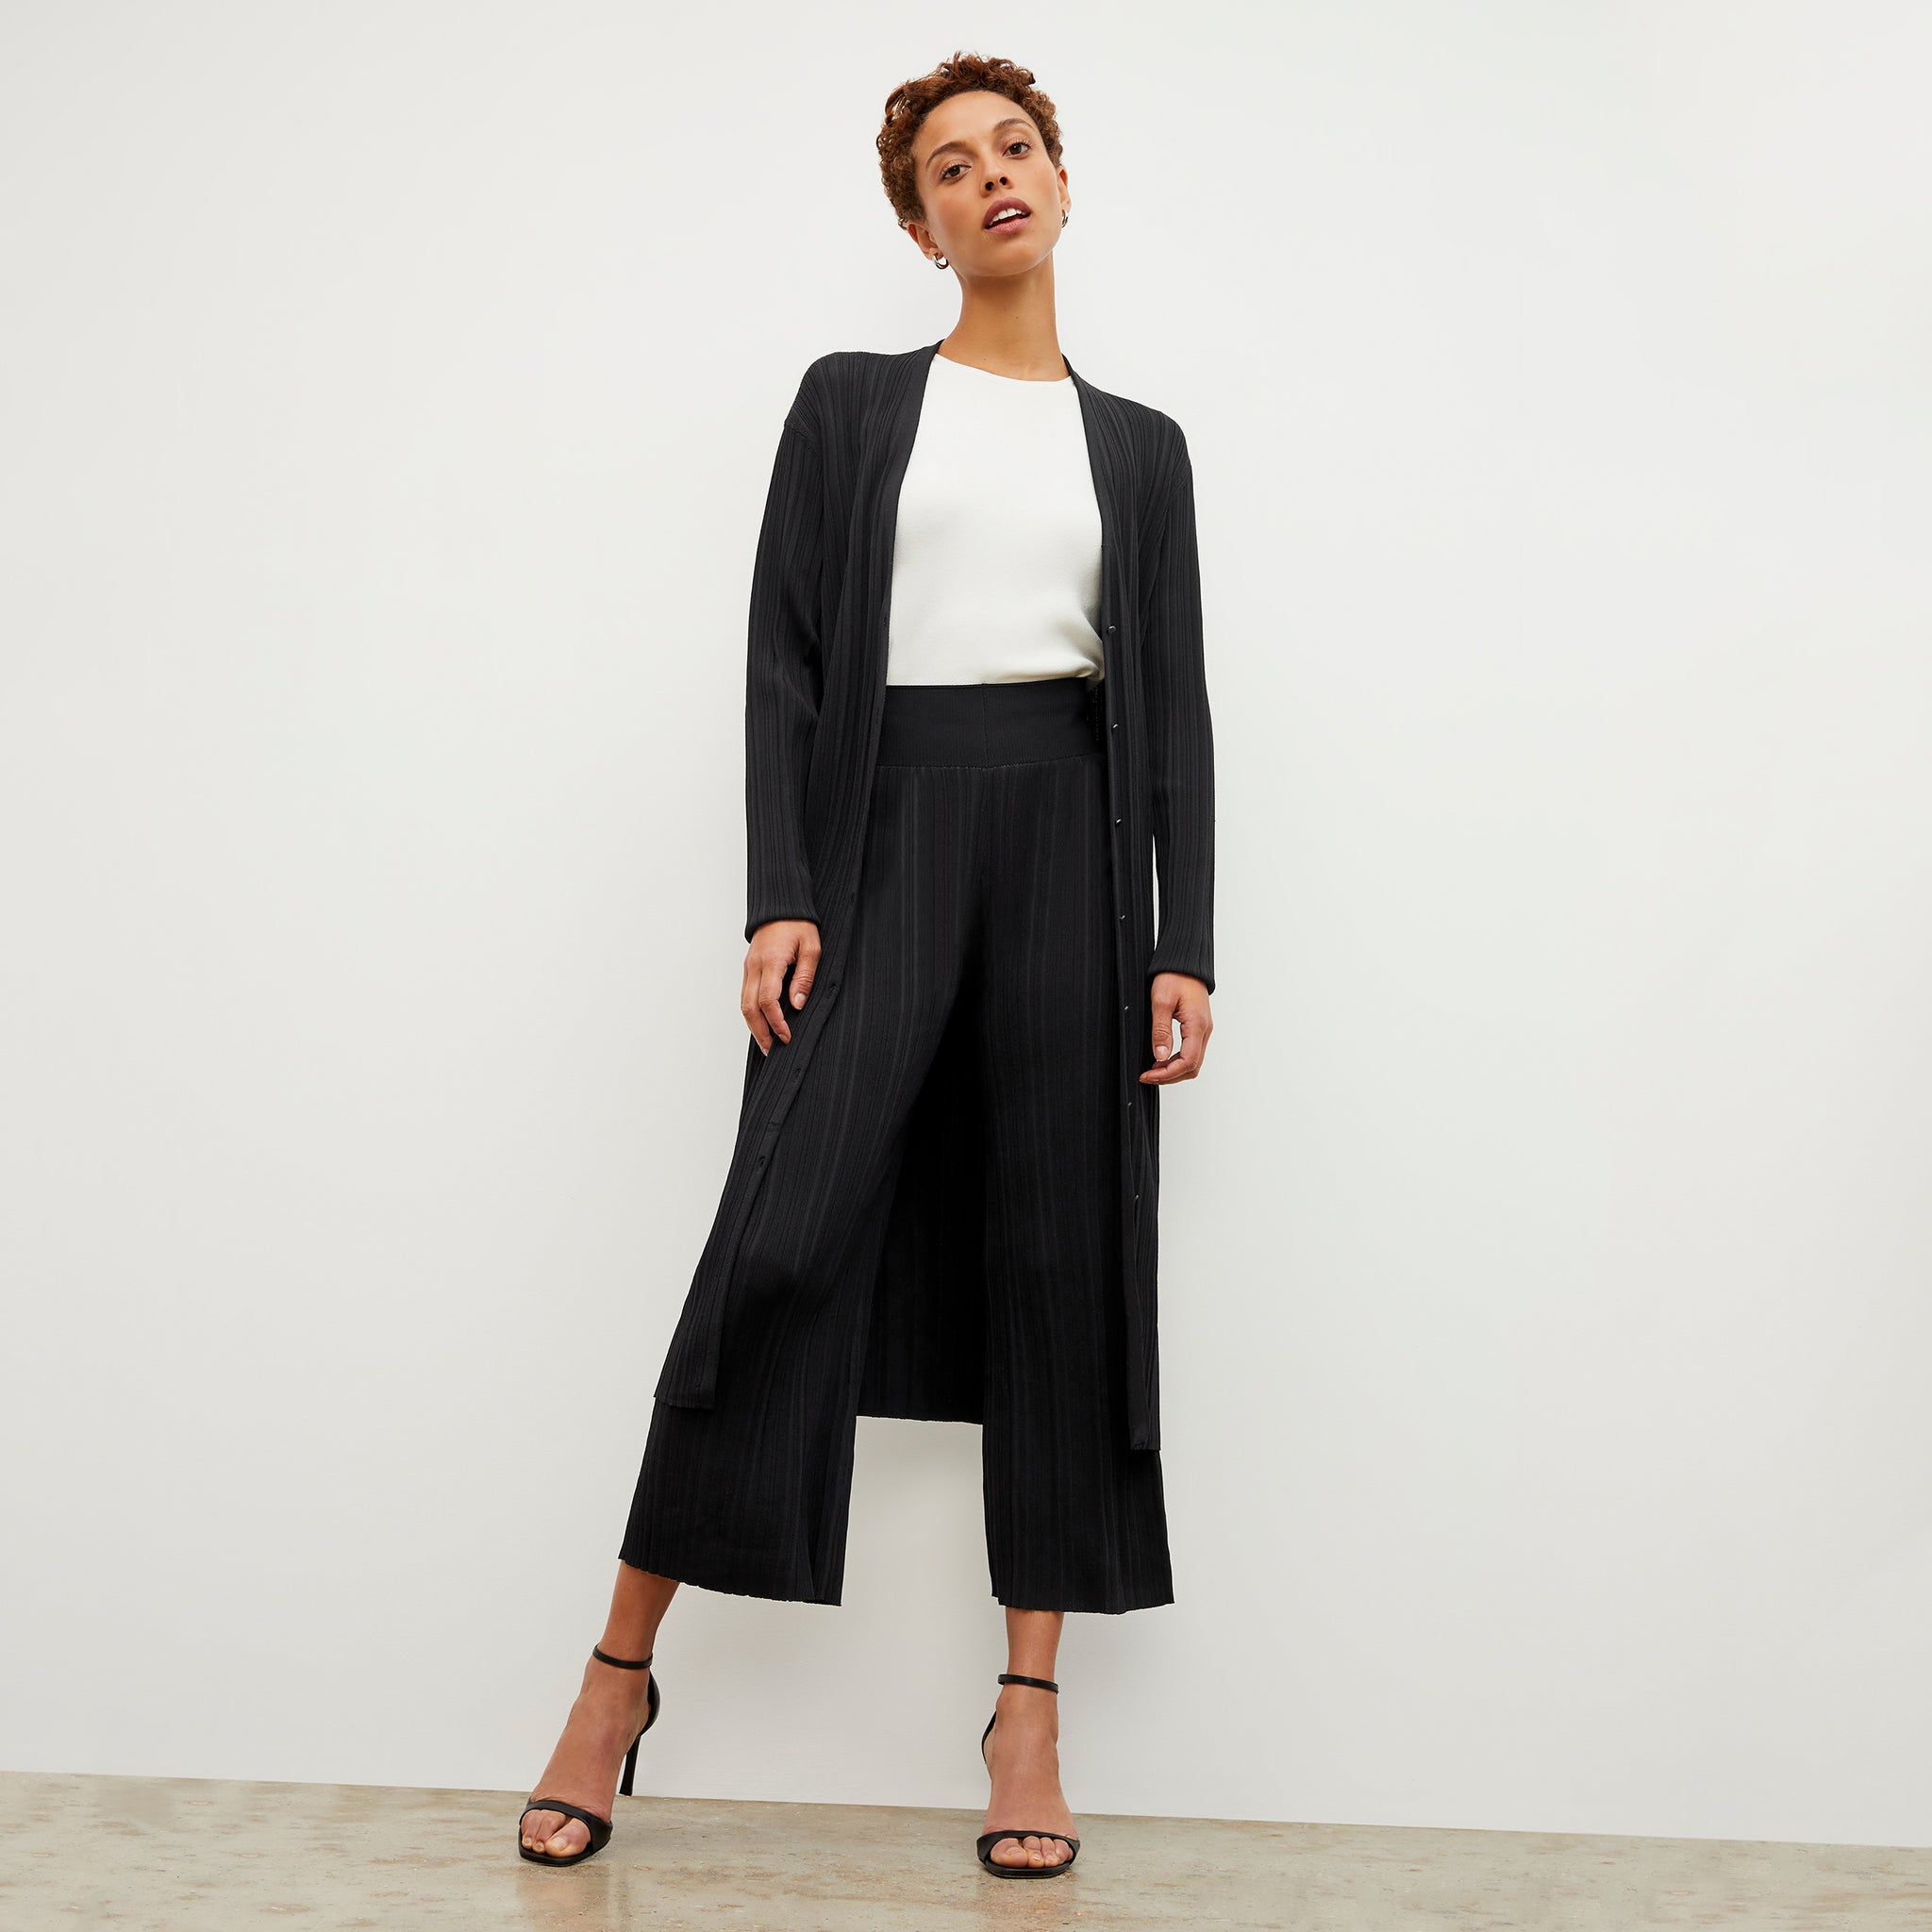 Front image of a woman wearing the Marijane Pant - Textured Knit in Black